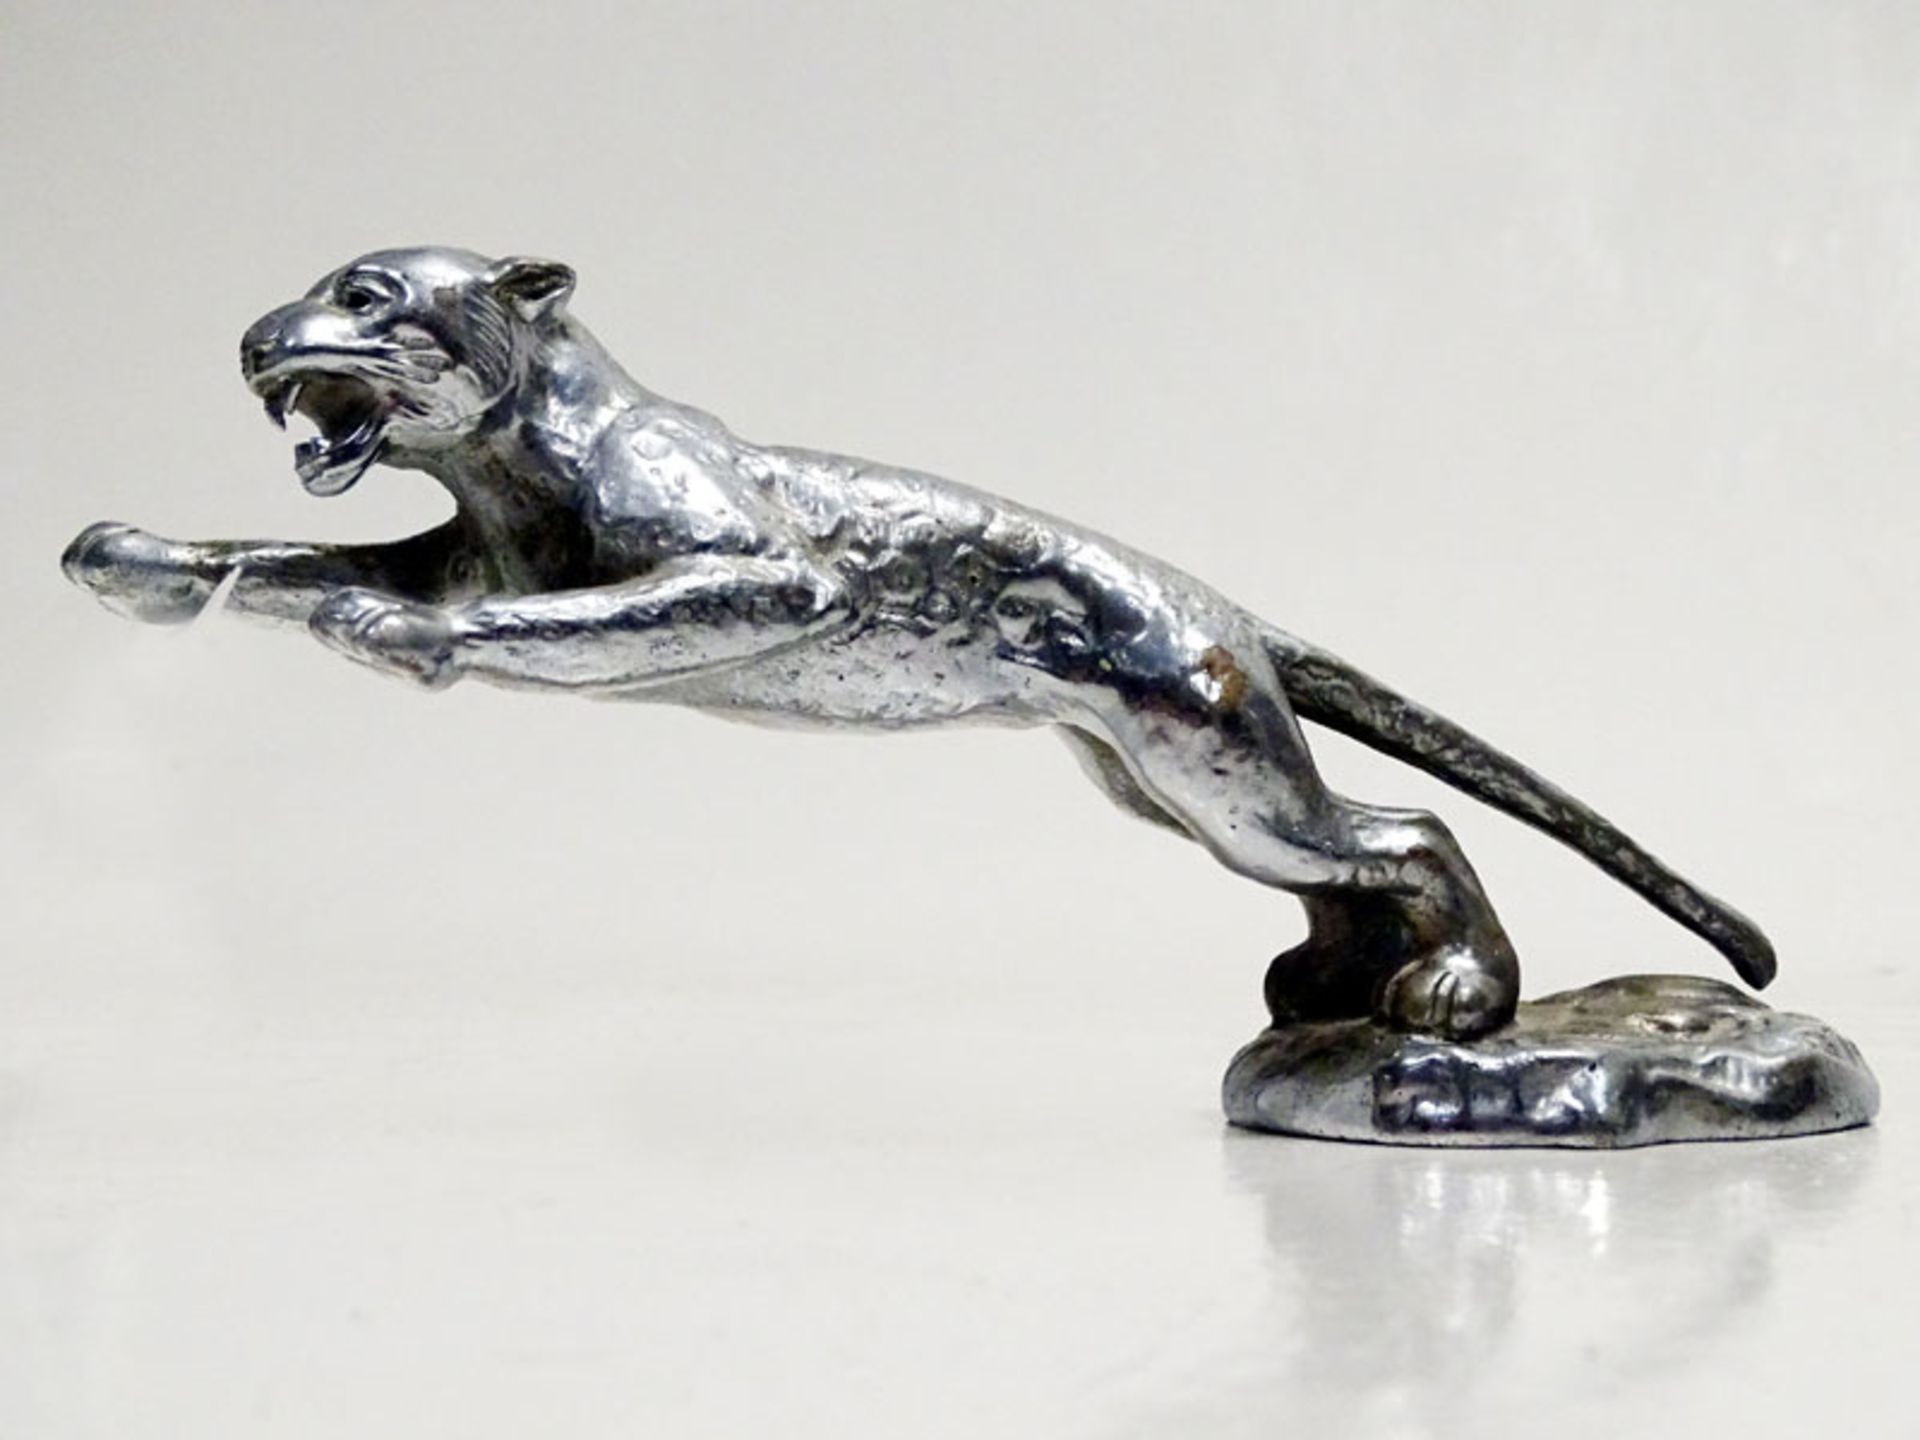 A Rare Jaguar 'Leaping Cat' Mascot fitted to SS100 Models